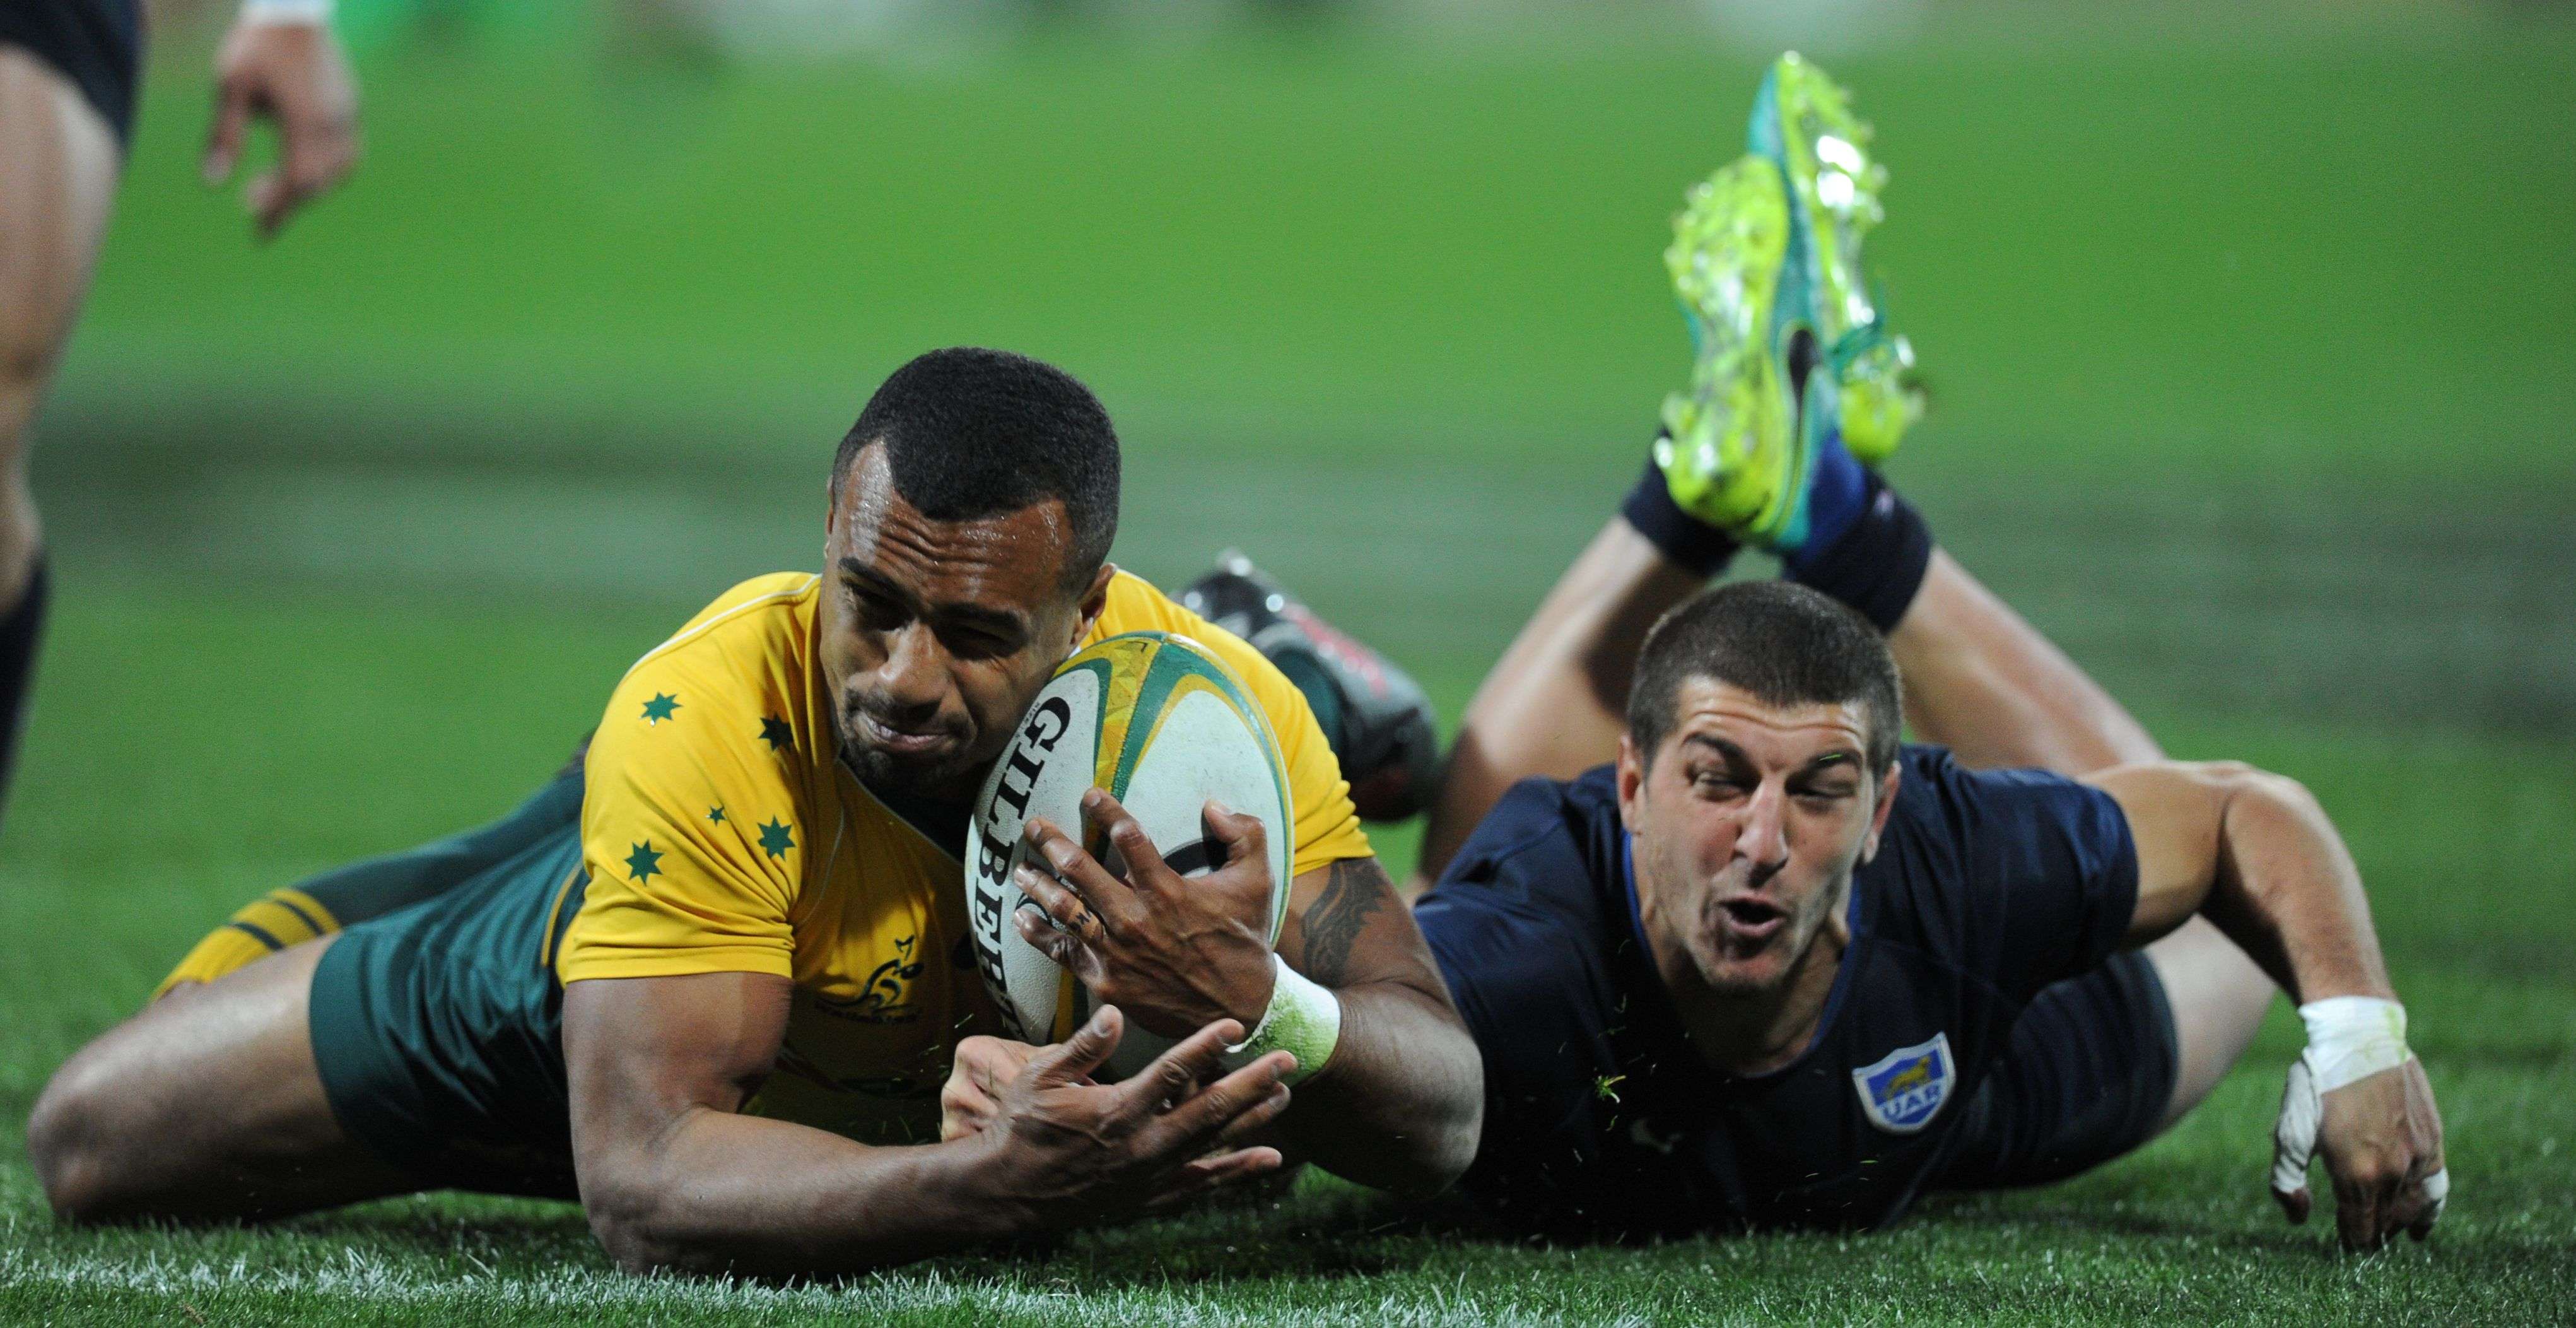 Australia scrum half Will Genia, who had an outstanding game, scores against Argentina in the Rugby Championship match in Perth. Australia won 36-20. Photo: AFP